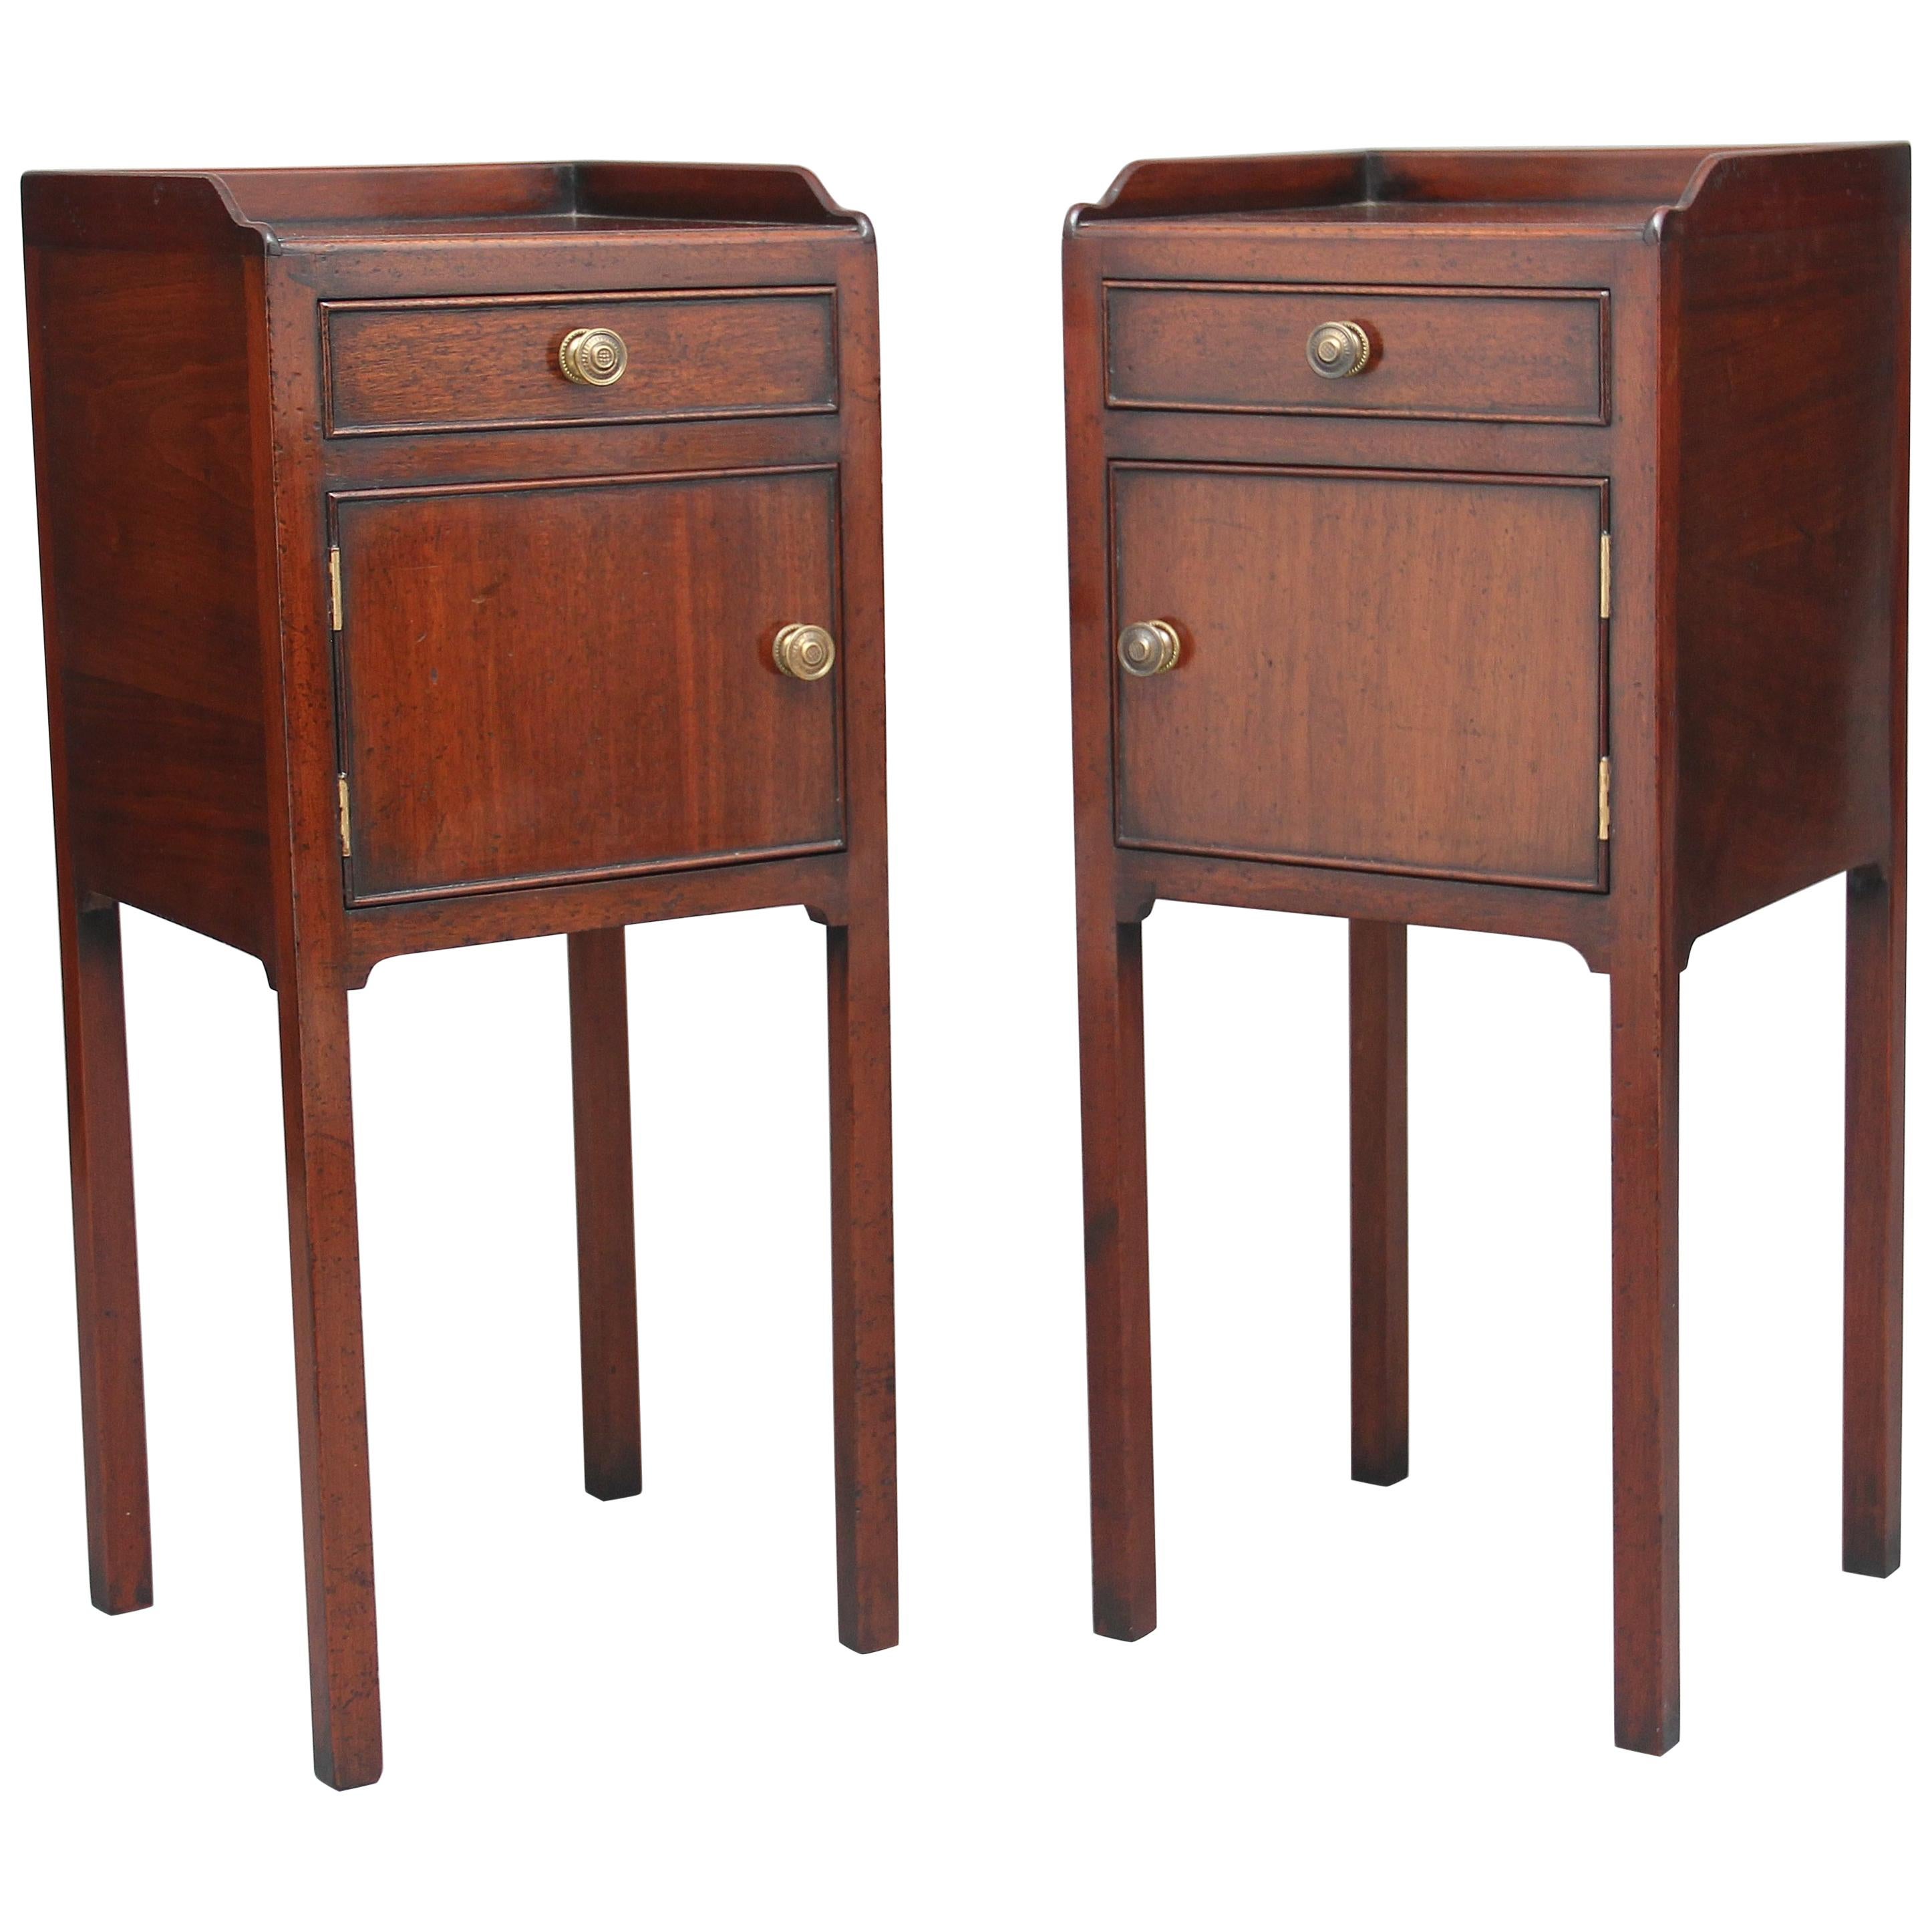 Pair of Early 20th Century Mahogany Bedside Cupboards